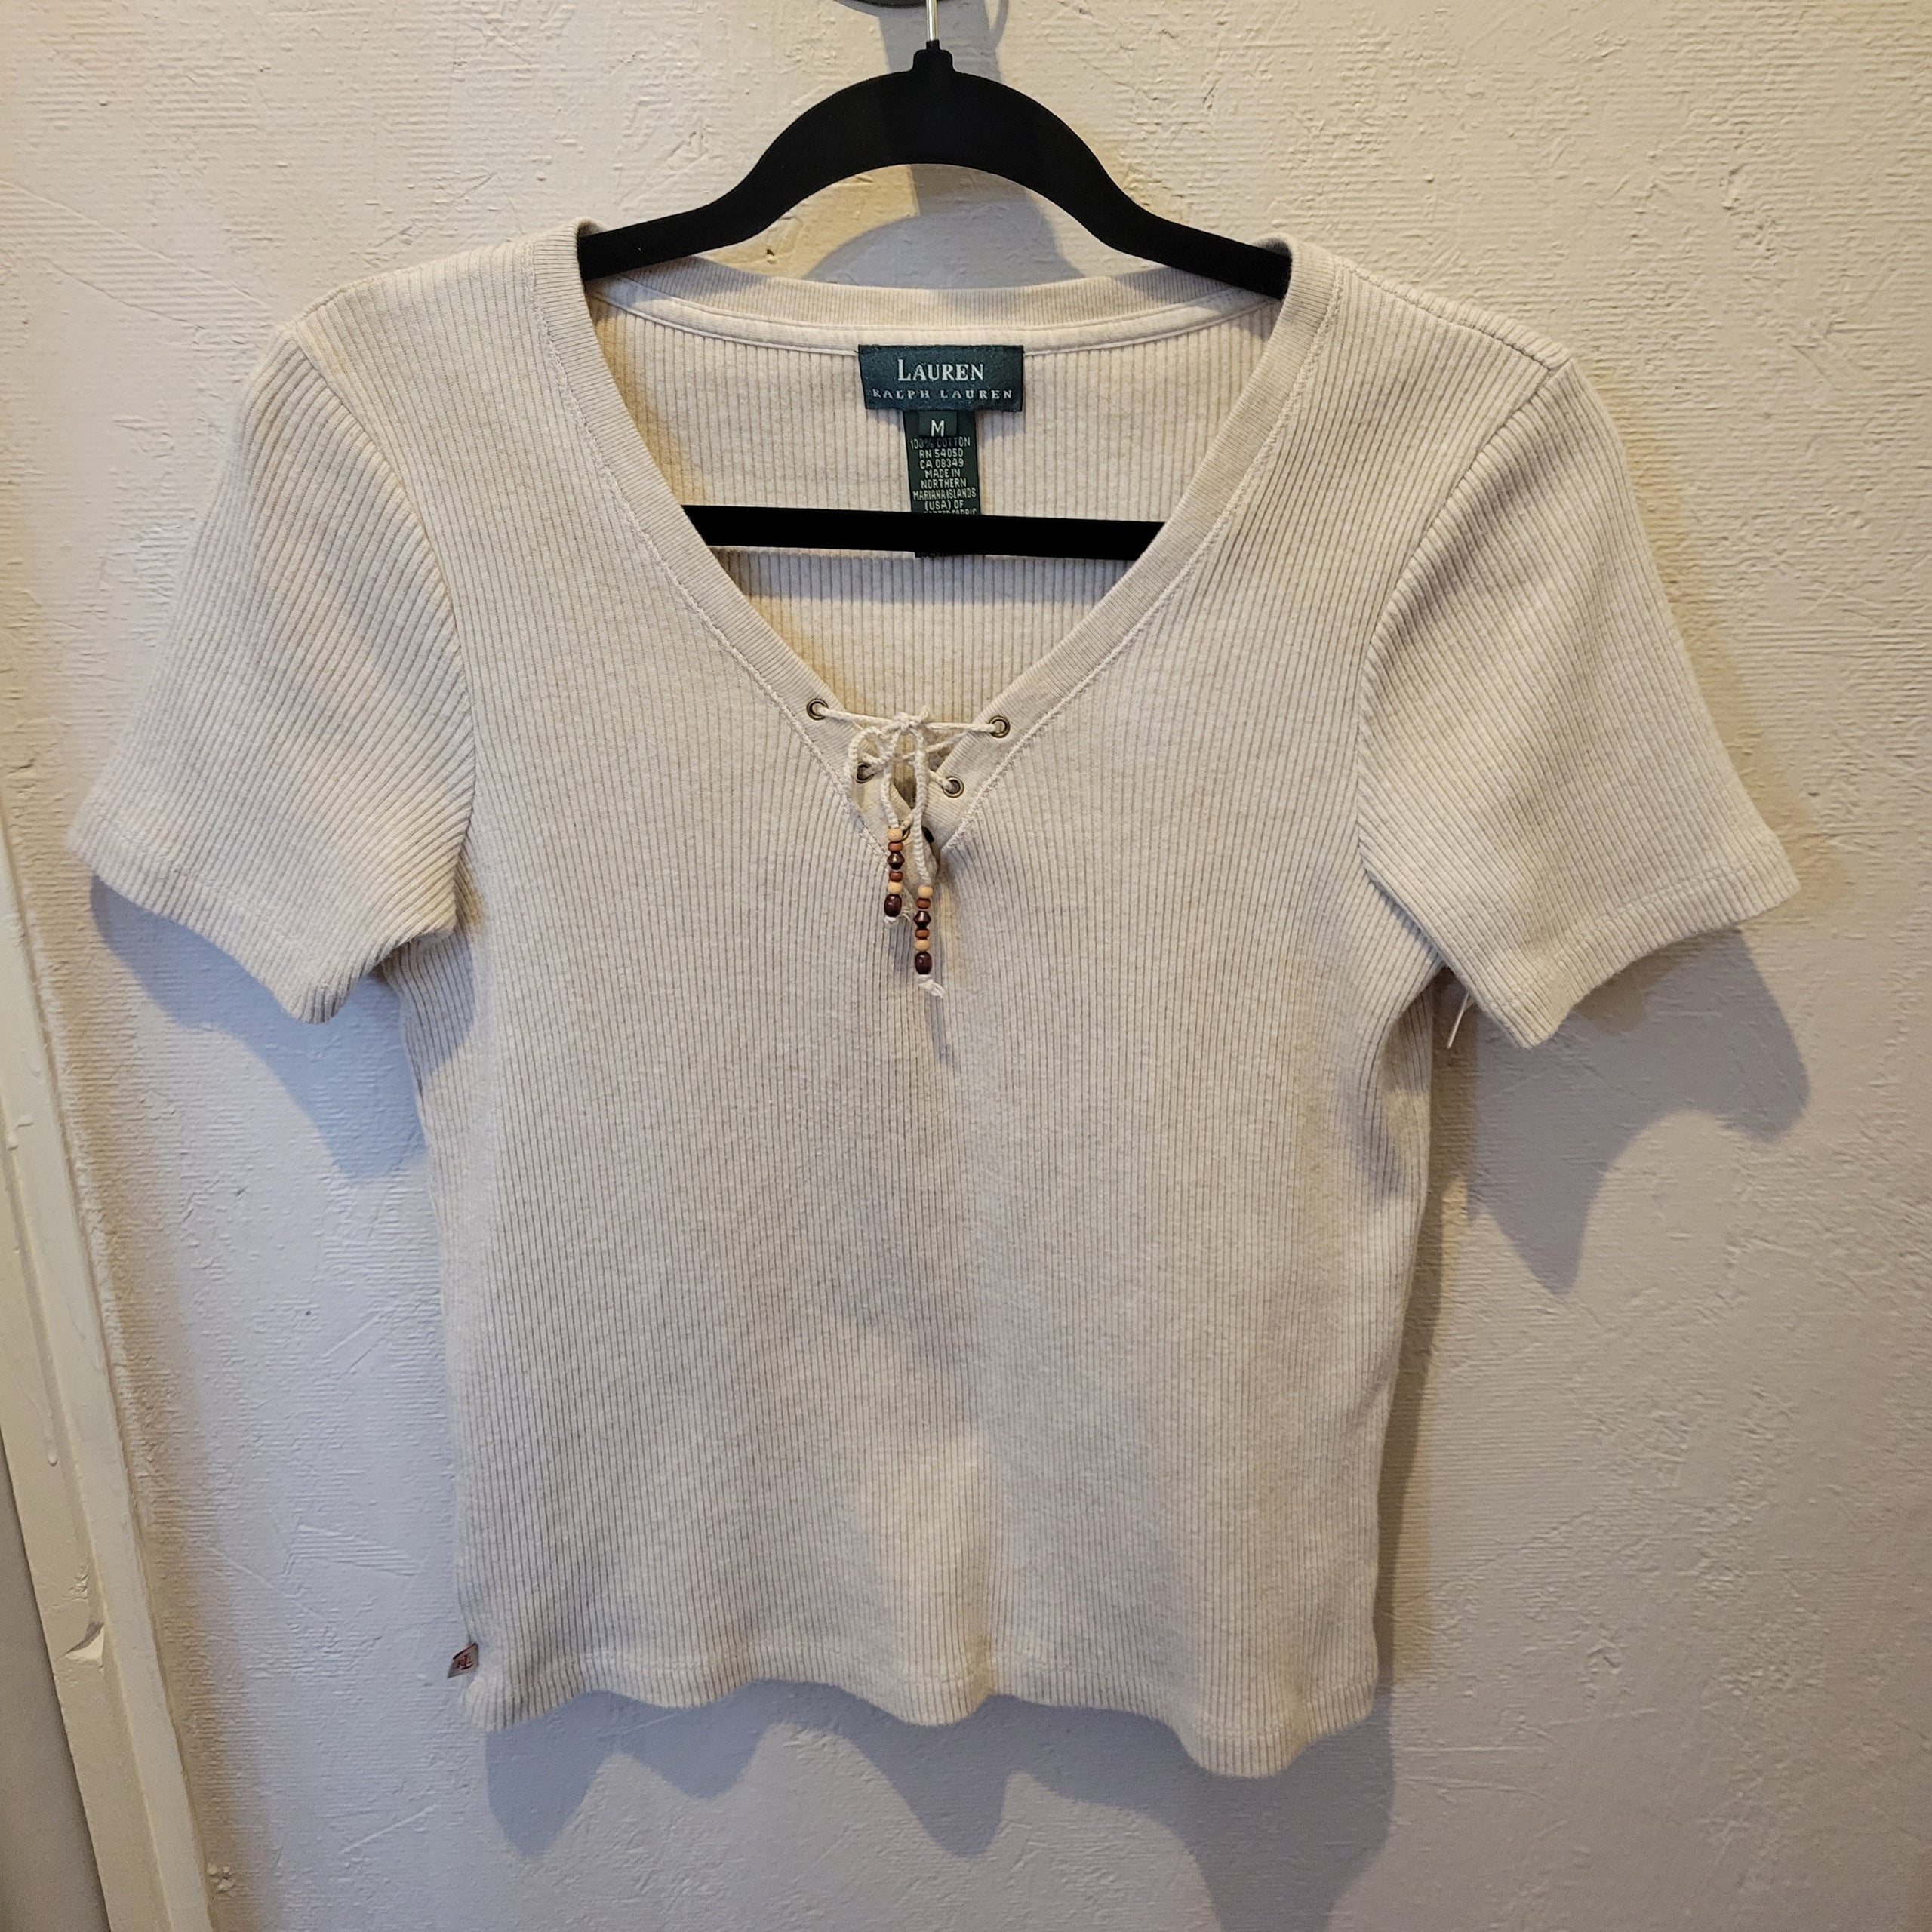 Ralph Lauren Tan Rib Knit Tee with Lace Up Neckline | Infinite Charm  Clothing Consignment